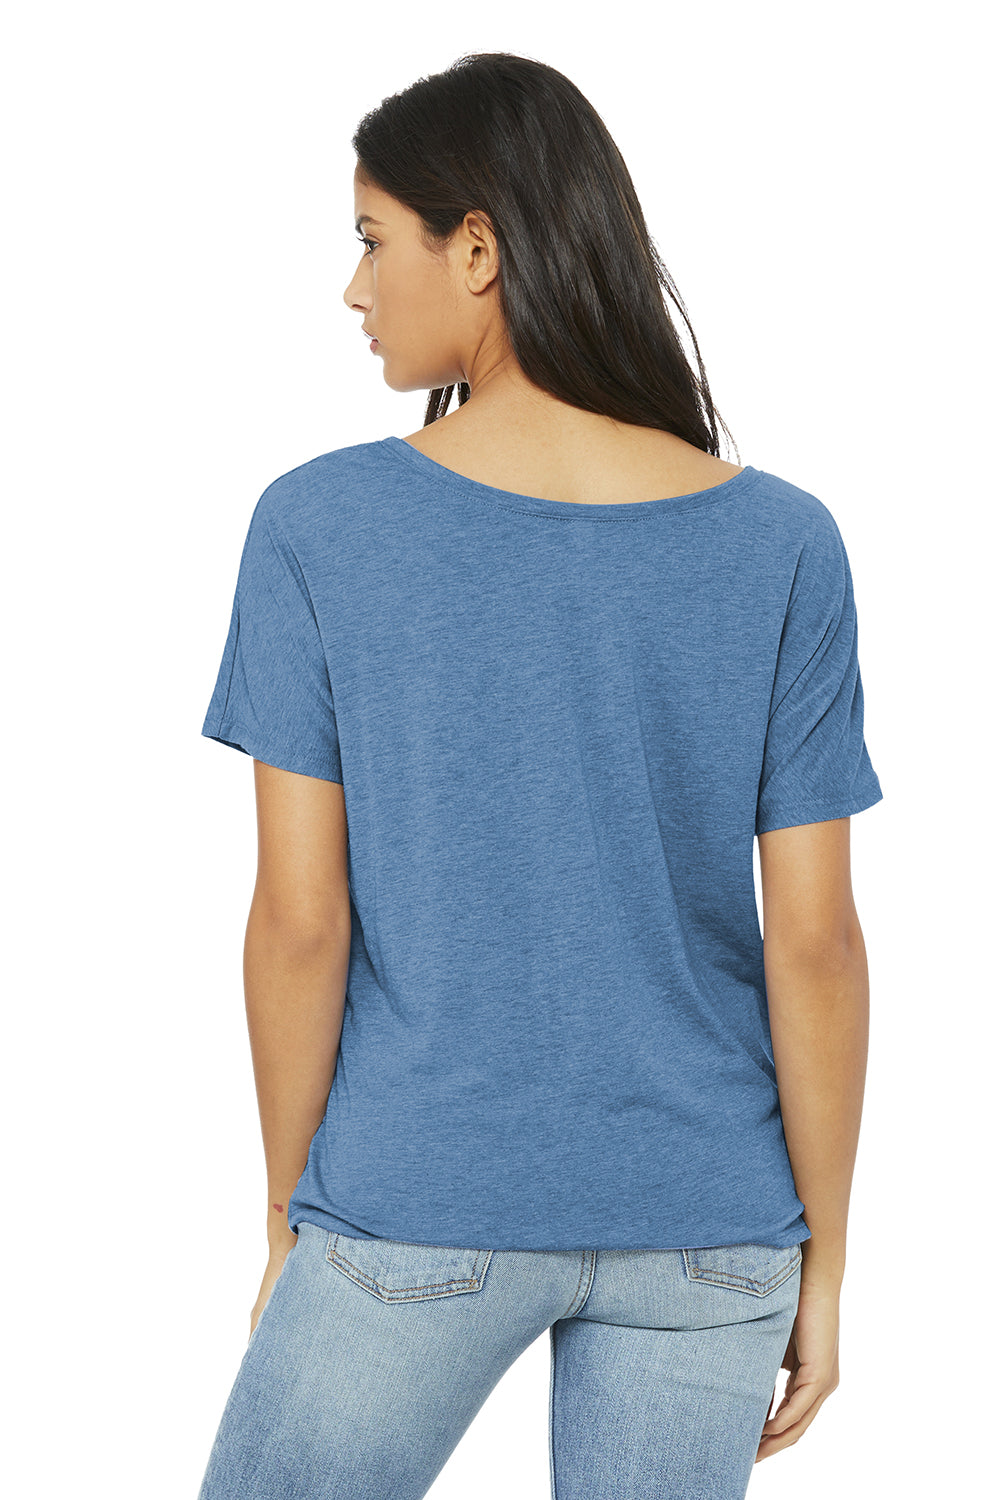 Bella + Canvas BC8816/8816 Womens Slouchy Short Sleeve Wide Neck T-Shirt Blue Triblend Model Back